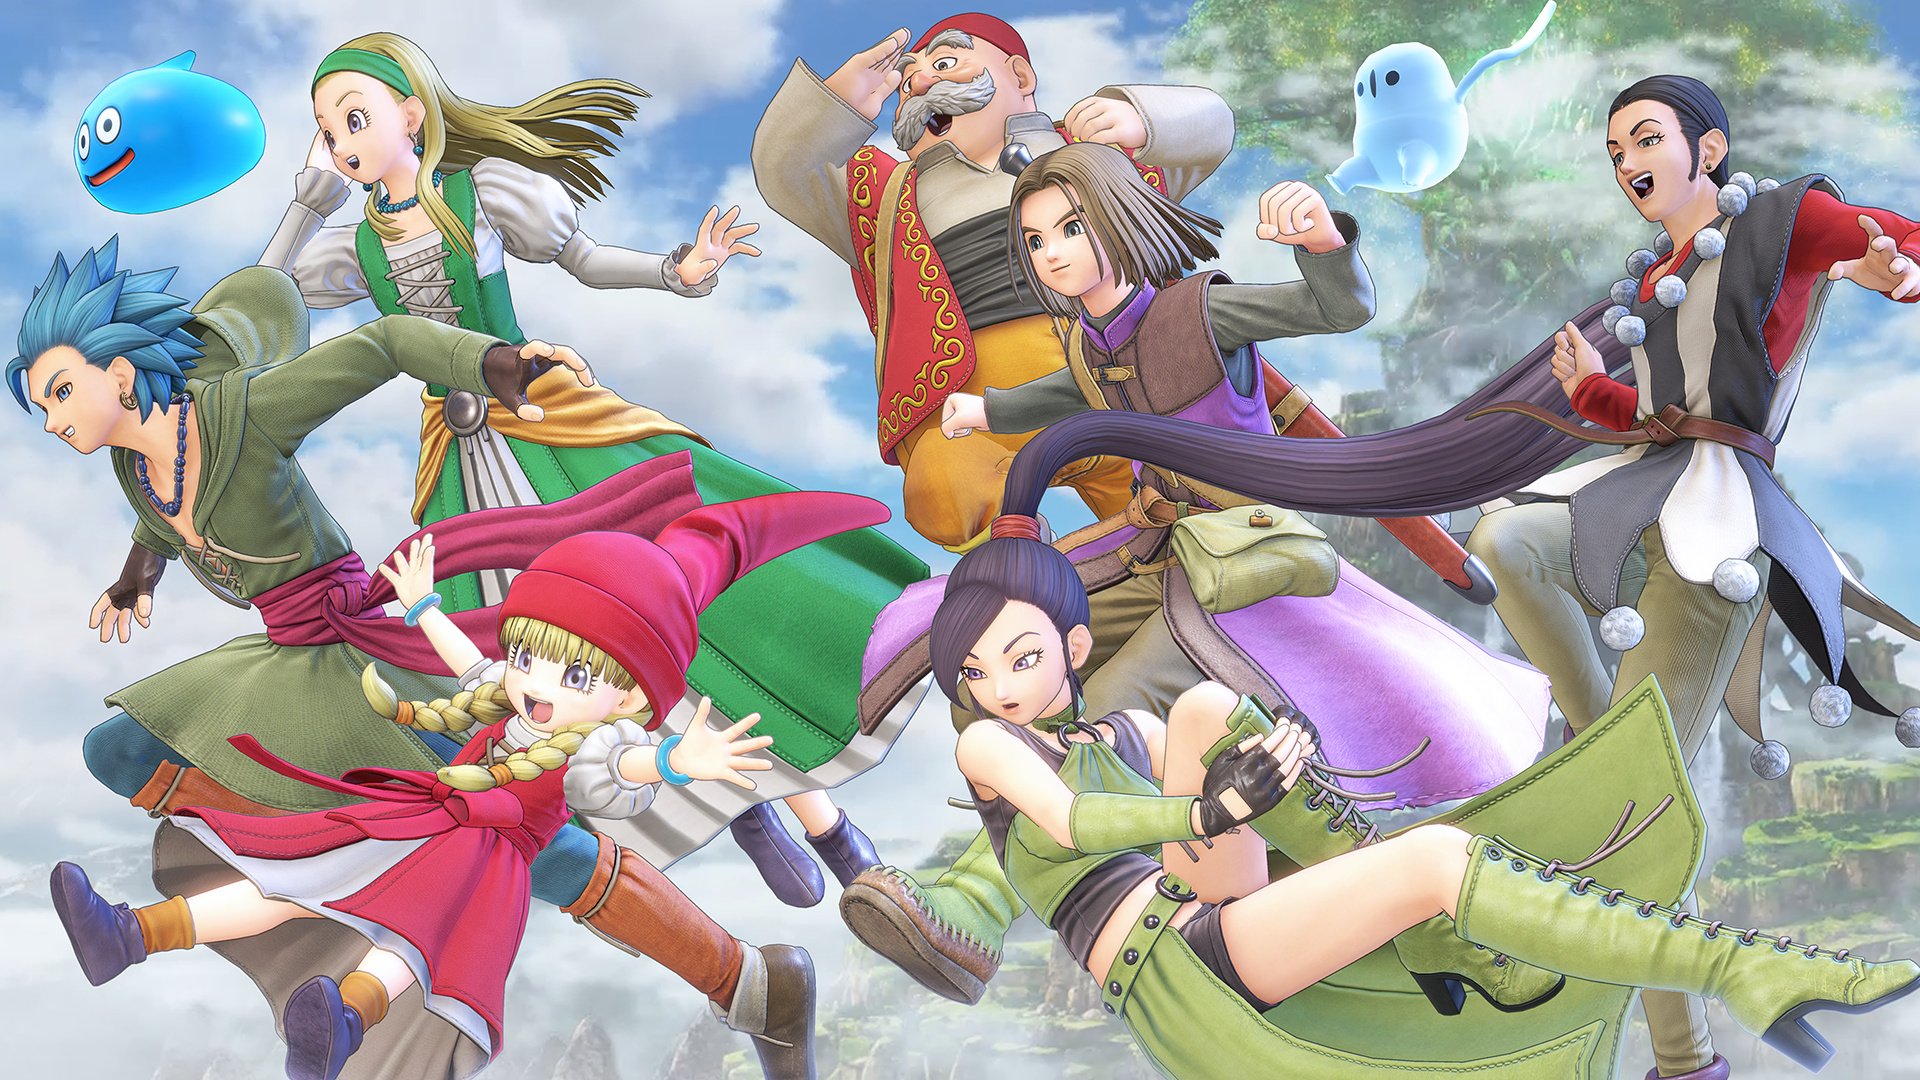 What We Hope to See From the Dragon Quest 35th Anniversary Livestream